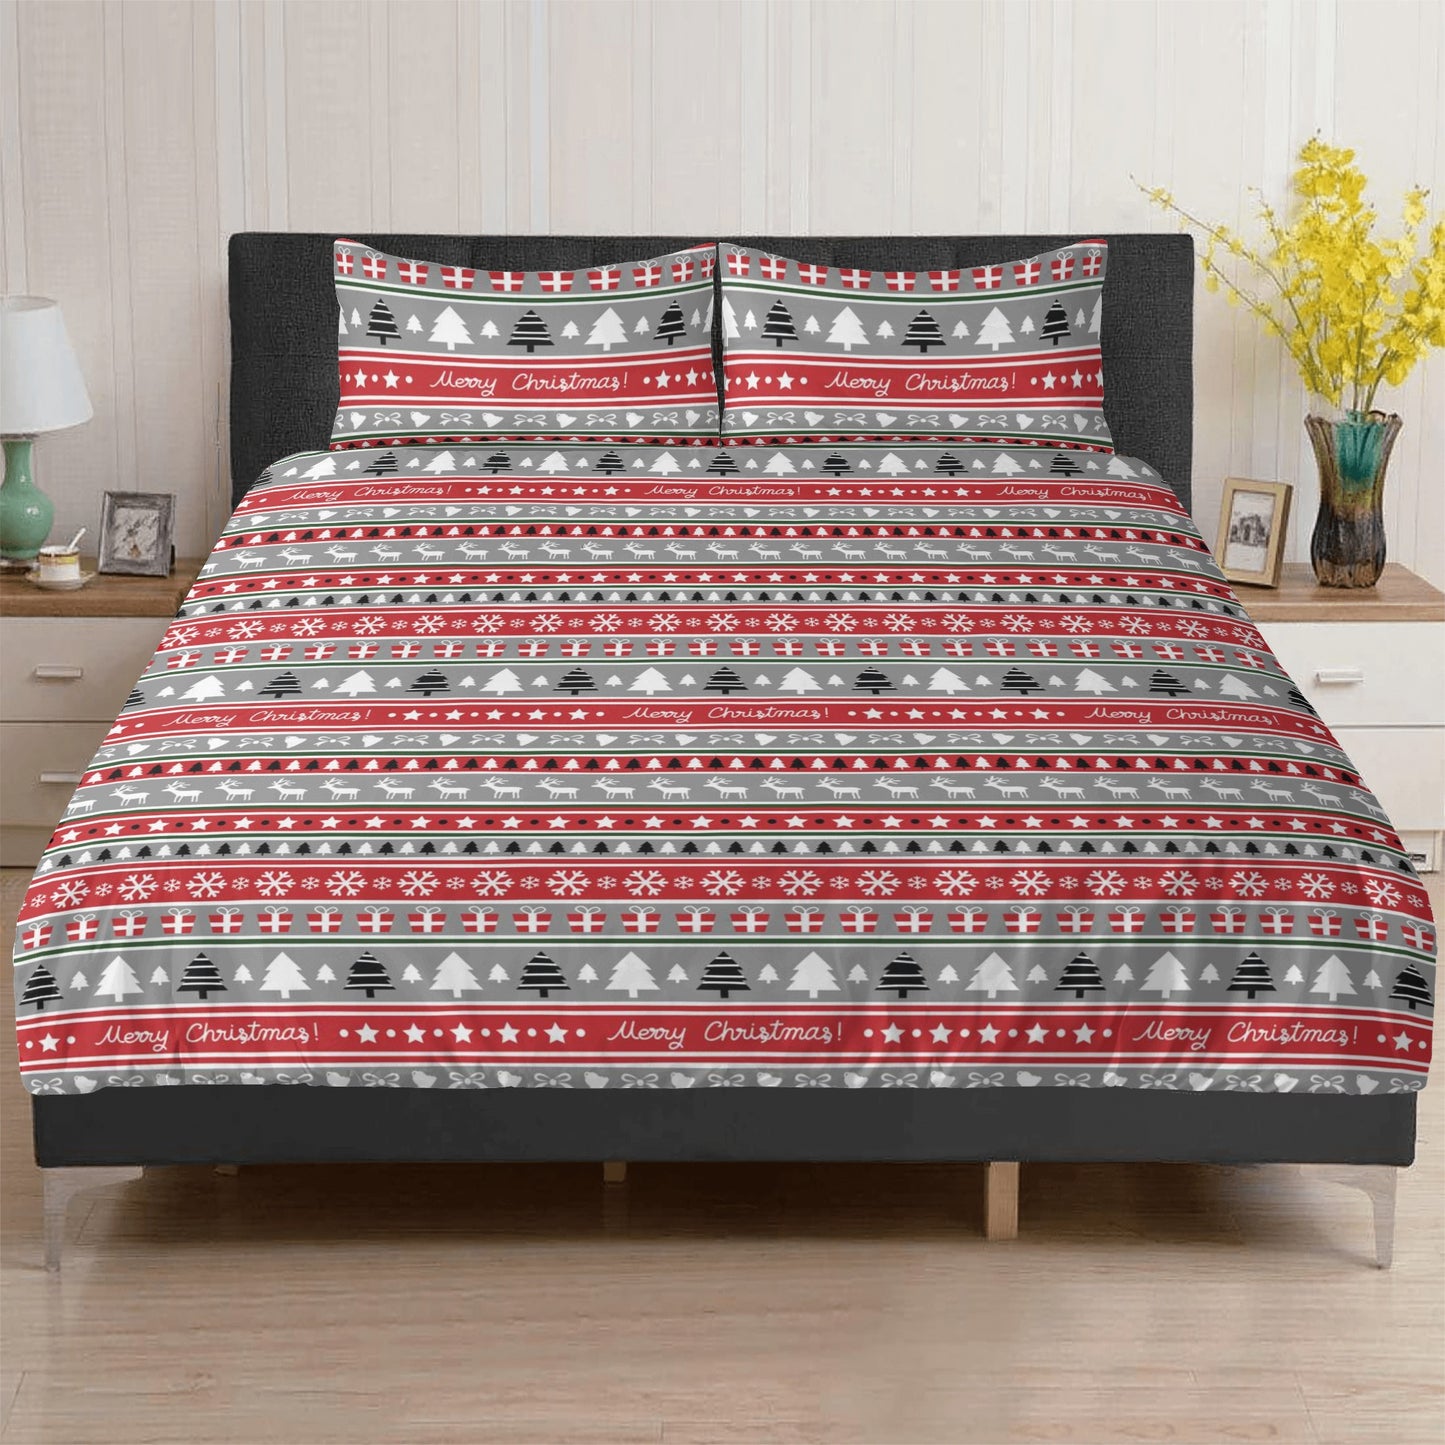 Bring Christmas to Be to Help You Fall Asleep 3 Pcs Beddings